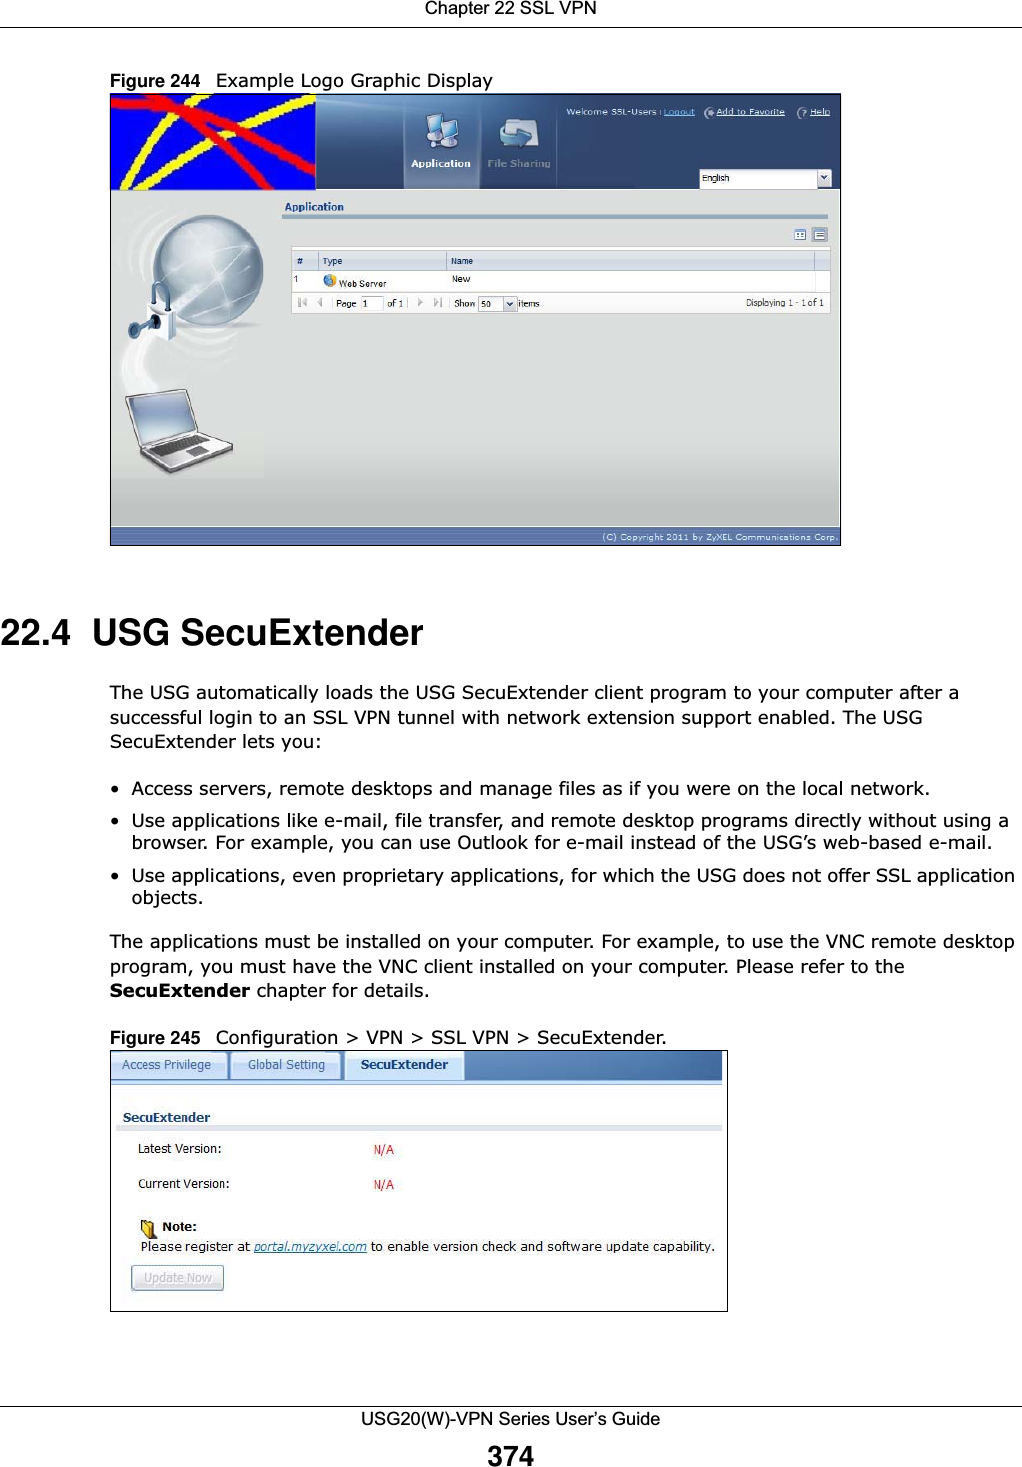 Chapter 22 SSL VPNUSG20(W)-VPN Series User’s Guide374Figure 244   Example Logo Graphic Display 22.4  USG SecuExtenderThe USG automatically loads the USG SecuExtender client program to your computer after a successful login to an SSL VPN tunnel with network extension support enabled. The USG SecuExtender lets you:• Access servers, remote desktops and manage files as if you were on the local network. • Use applications like e-mail, file transfer, and remote desktop programs directly without using a browser. For example, you can use Outlook for e-mail instead of the USG’s web-based e-mail. • Use applications, even proprietary applications, for which the USG does not offer SSL application objects. The applications must be installed on your computer. For example, to use the VNC remote desktop program, you must have the VNC client installed on your computer. Please refer to the SecuExtender chapter for details.Figure 245   Configuration &gt; VPN &gt; SSL VPN &gt; SecuExtender.